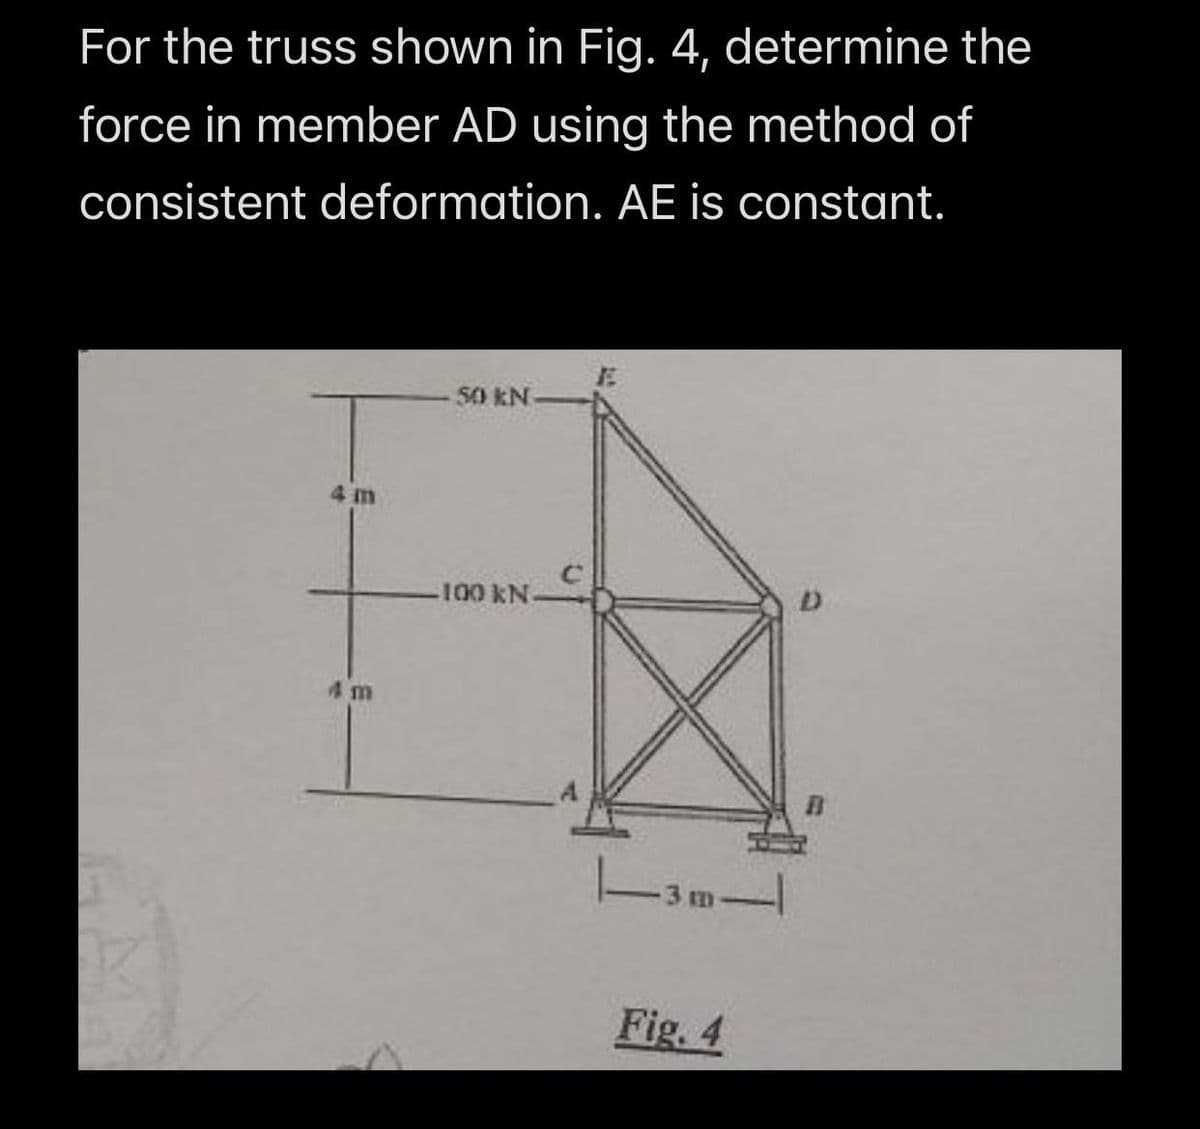 For the truss shown in Fig. 4, determine the
force in member AD using the method of
consistent deformation. AE is constant.
50 KN
4 m
100 KN
D
4 m
|-3m-|
Fig. 4
B